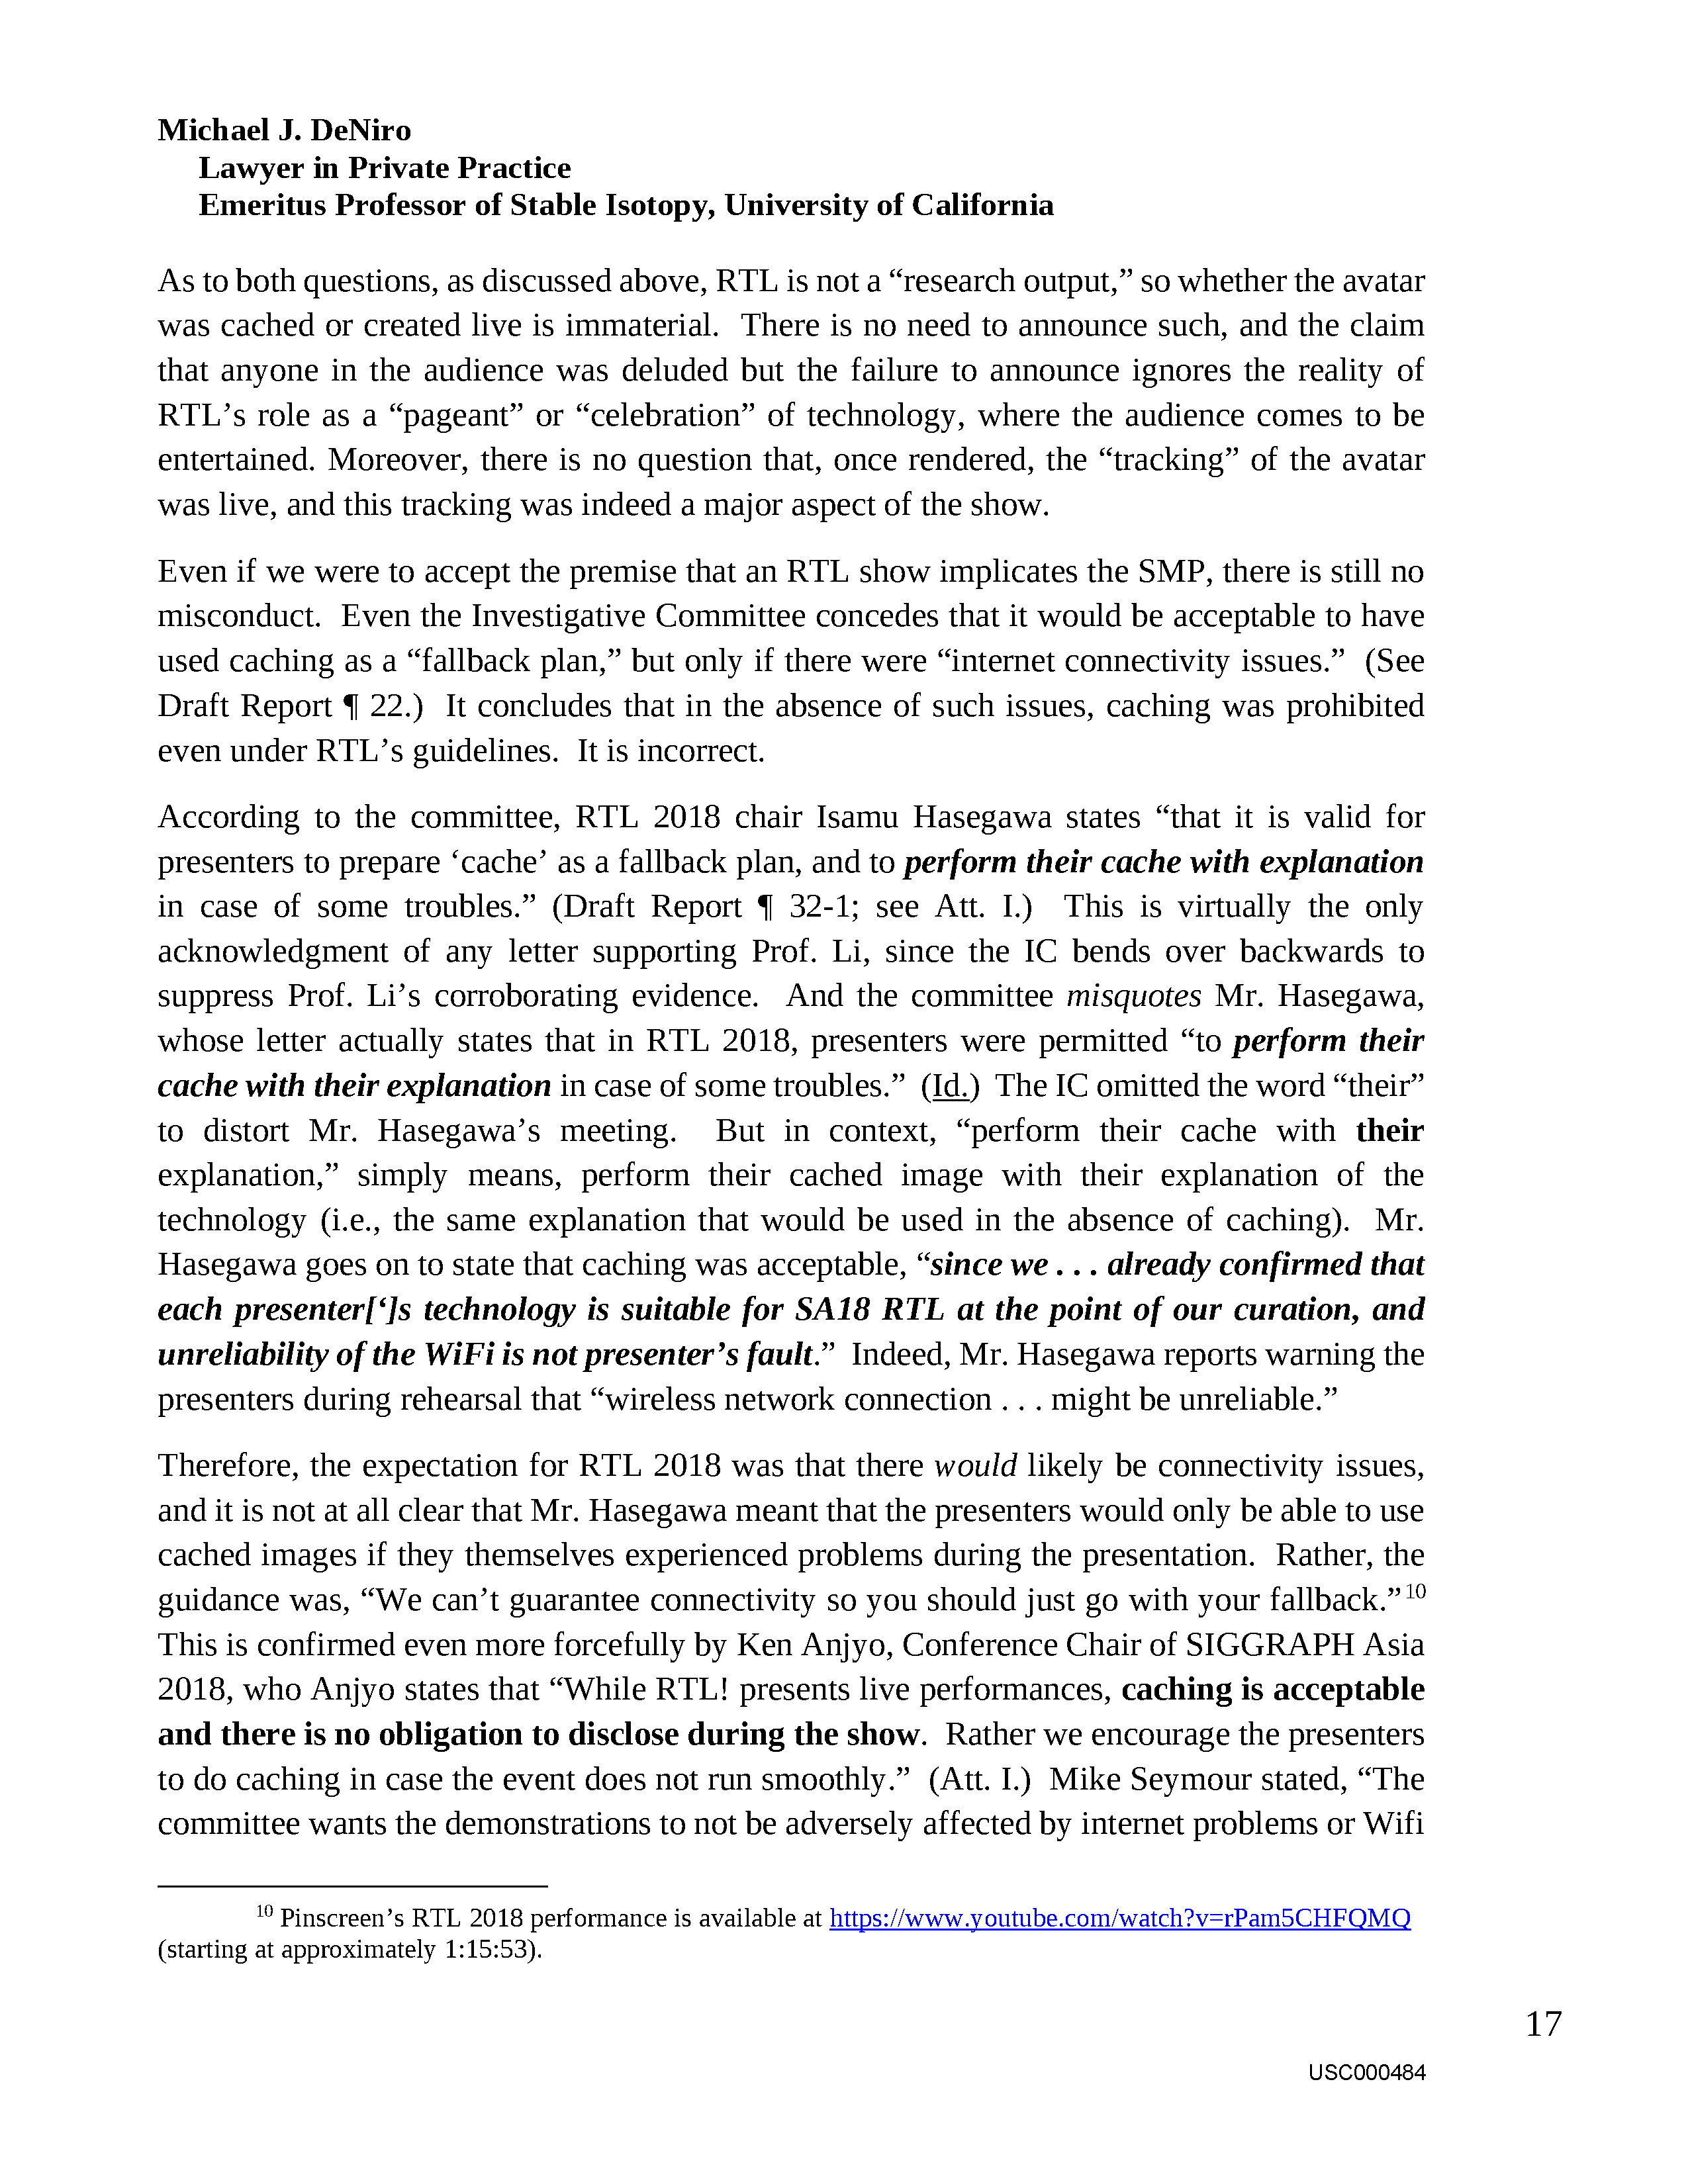 USC's Investigation Report re Hao Li's and Pinscreen's Scientific Misconduct at ACM SIGGRAPH RTL 2017 [Summary] Page 108